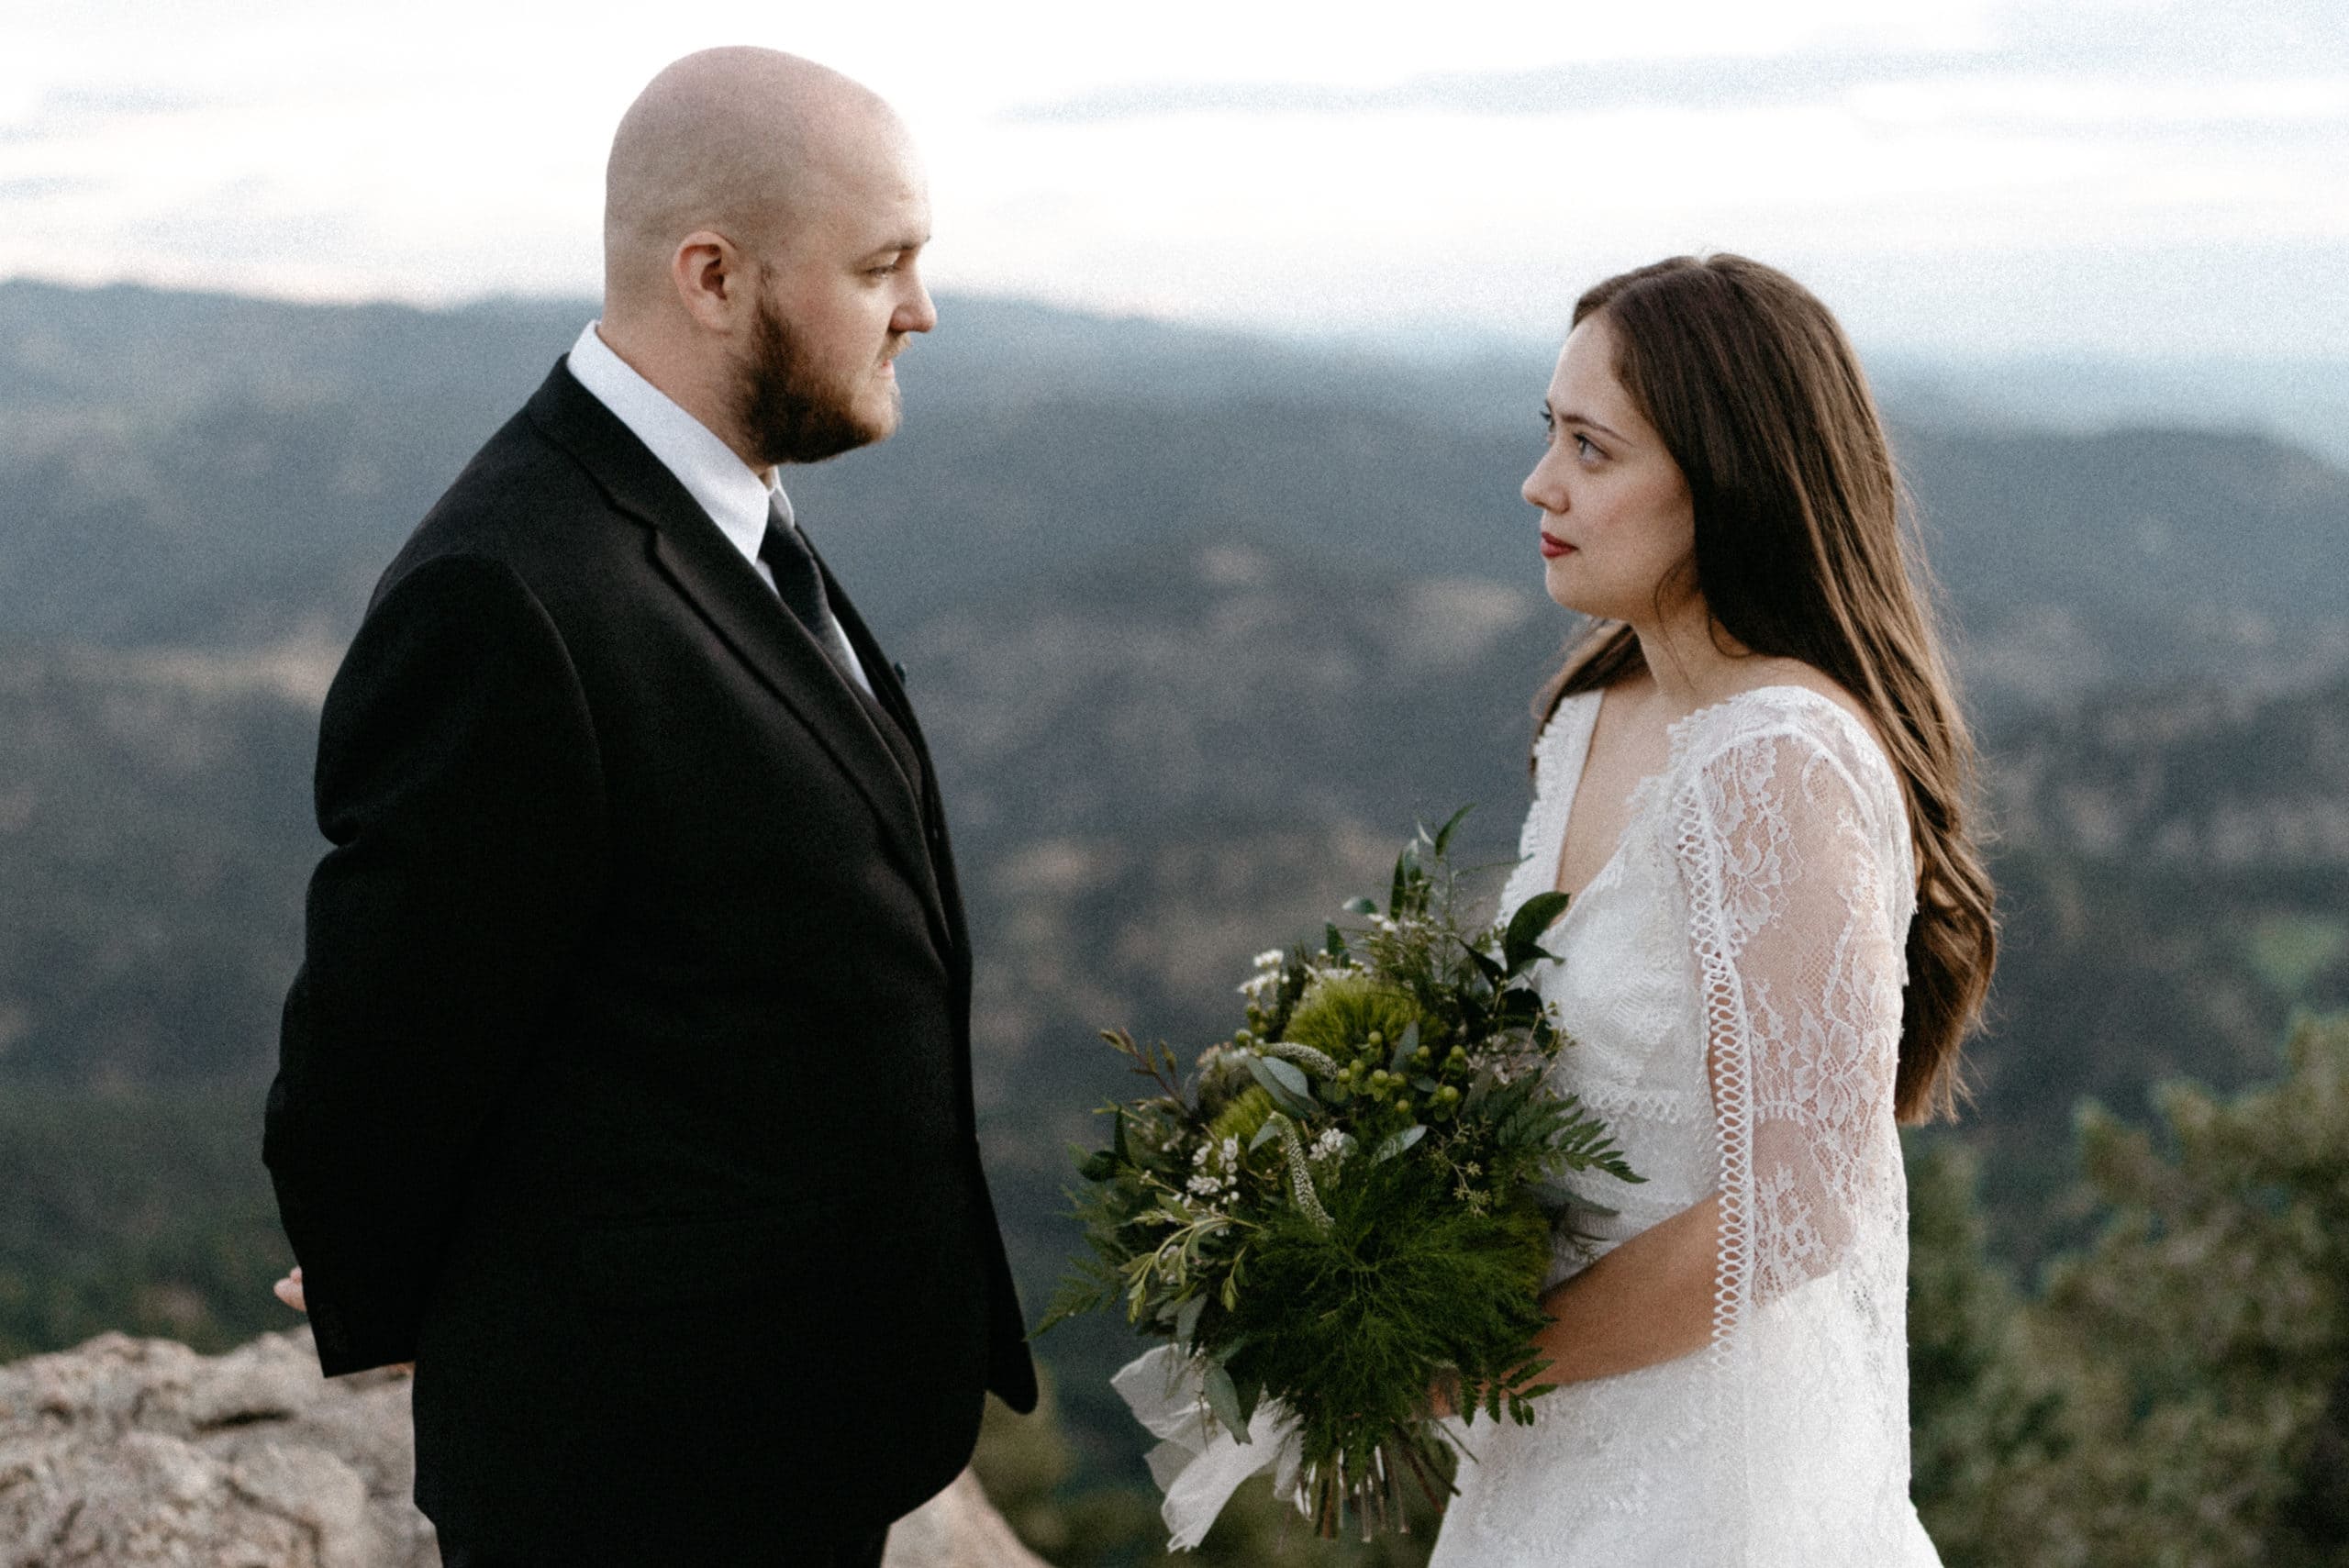 Reading vows at lost gulch overlook